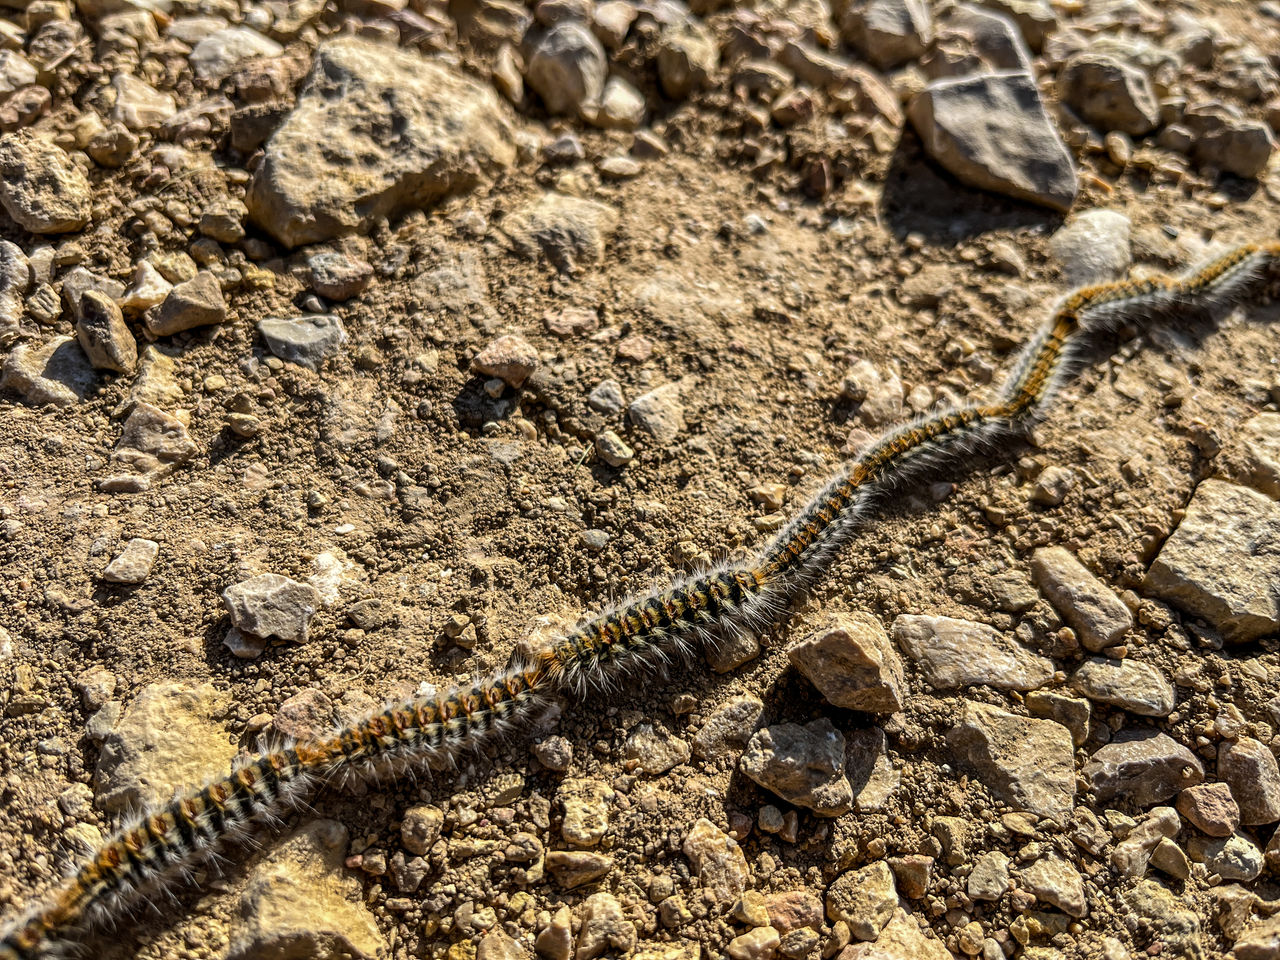 soil, reptile, animal, animal themes, nature, wildlife, no people, animal wildlife, land, day, high angle view, sunlight, one animal, outdoors, lizard, close-up, wall lizard, dirt, field, rock, full frame, viper